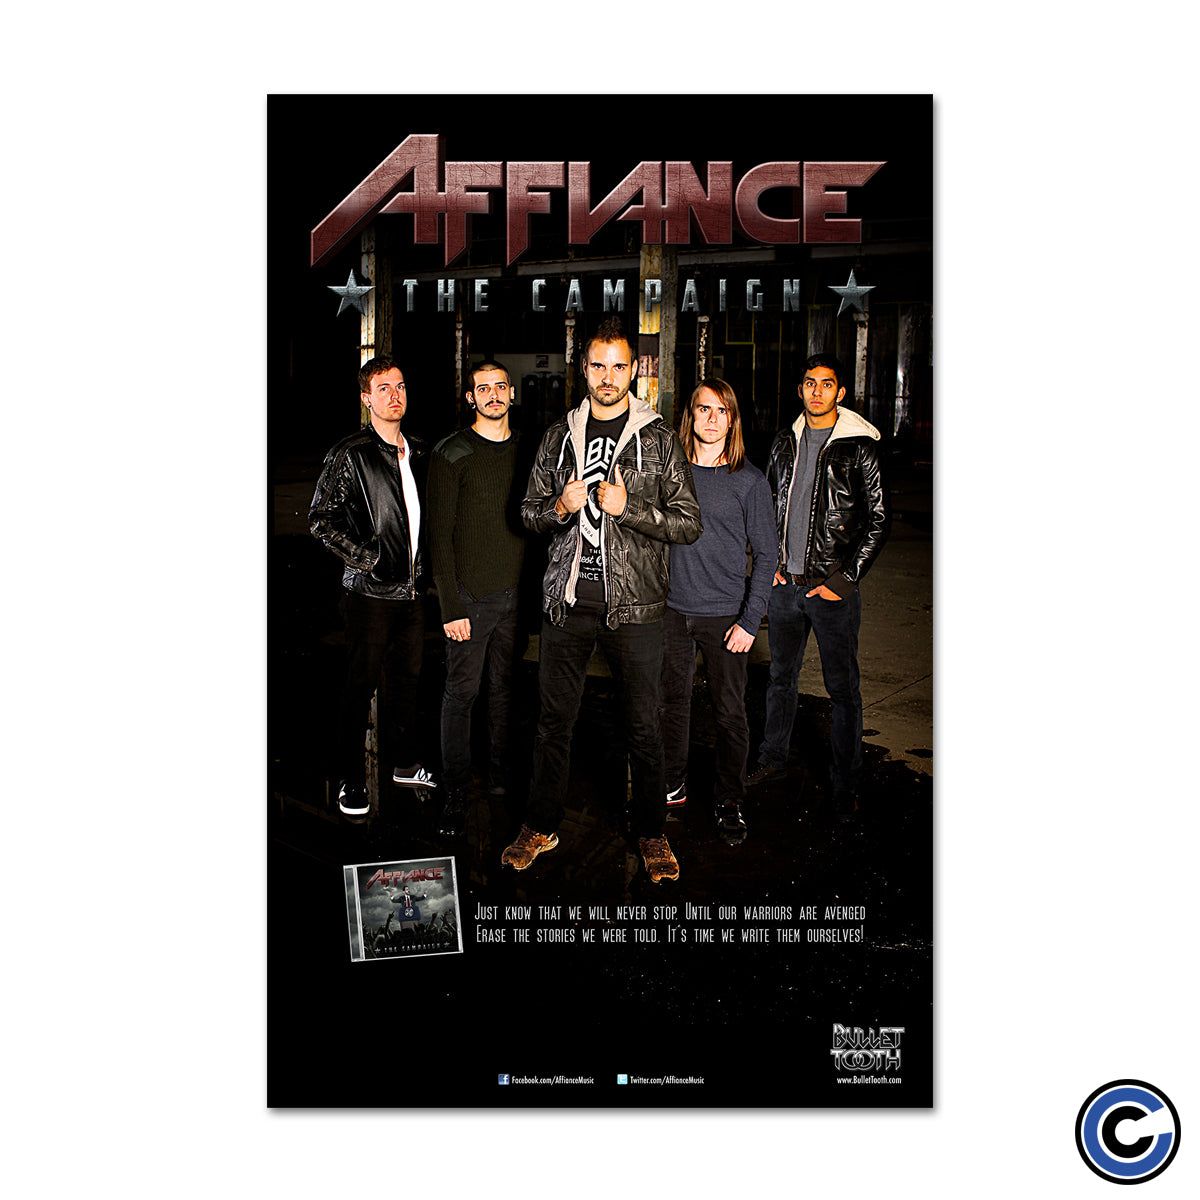 Affiance "The Campaign" Poster